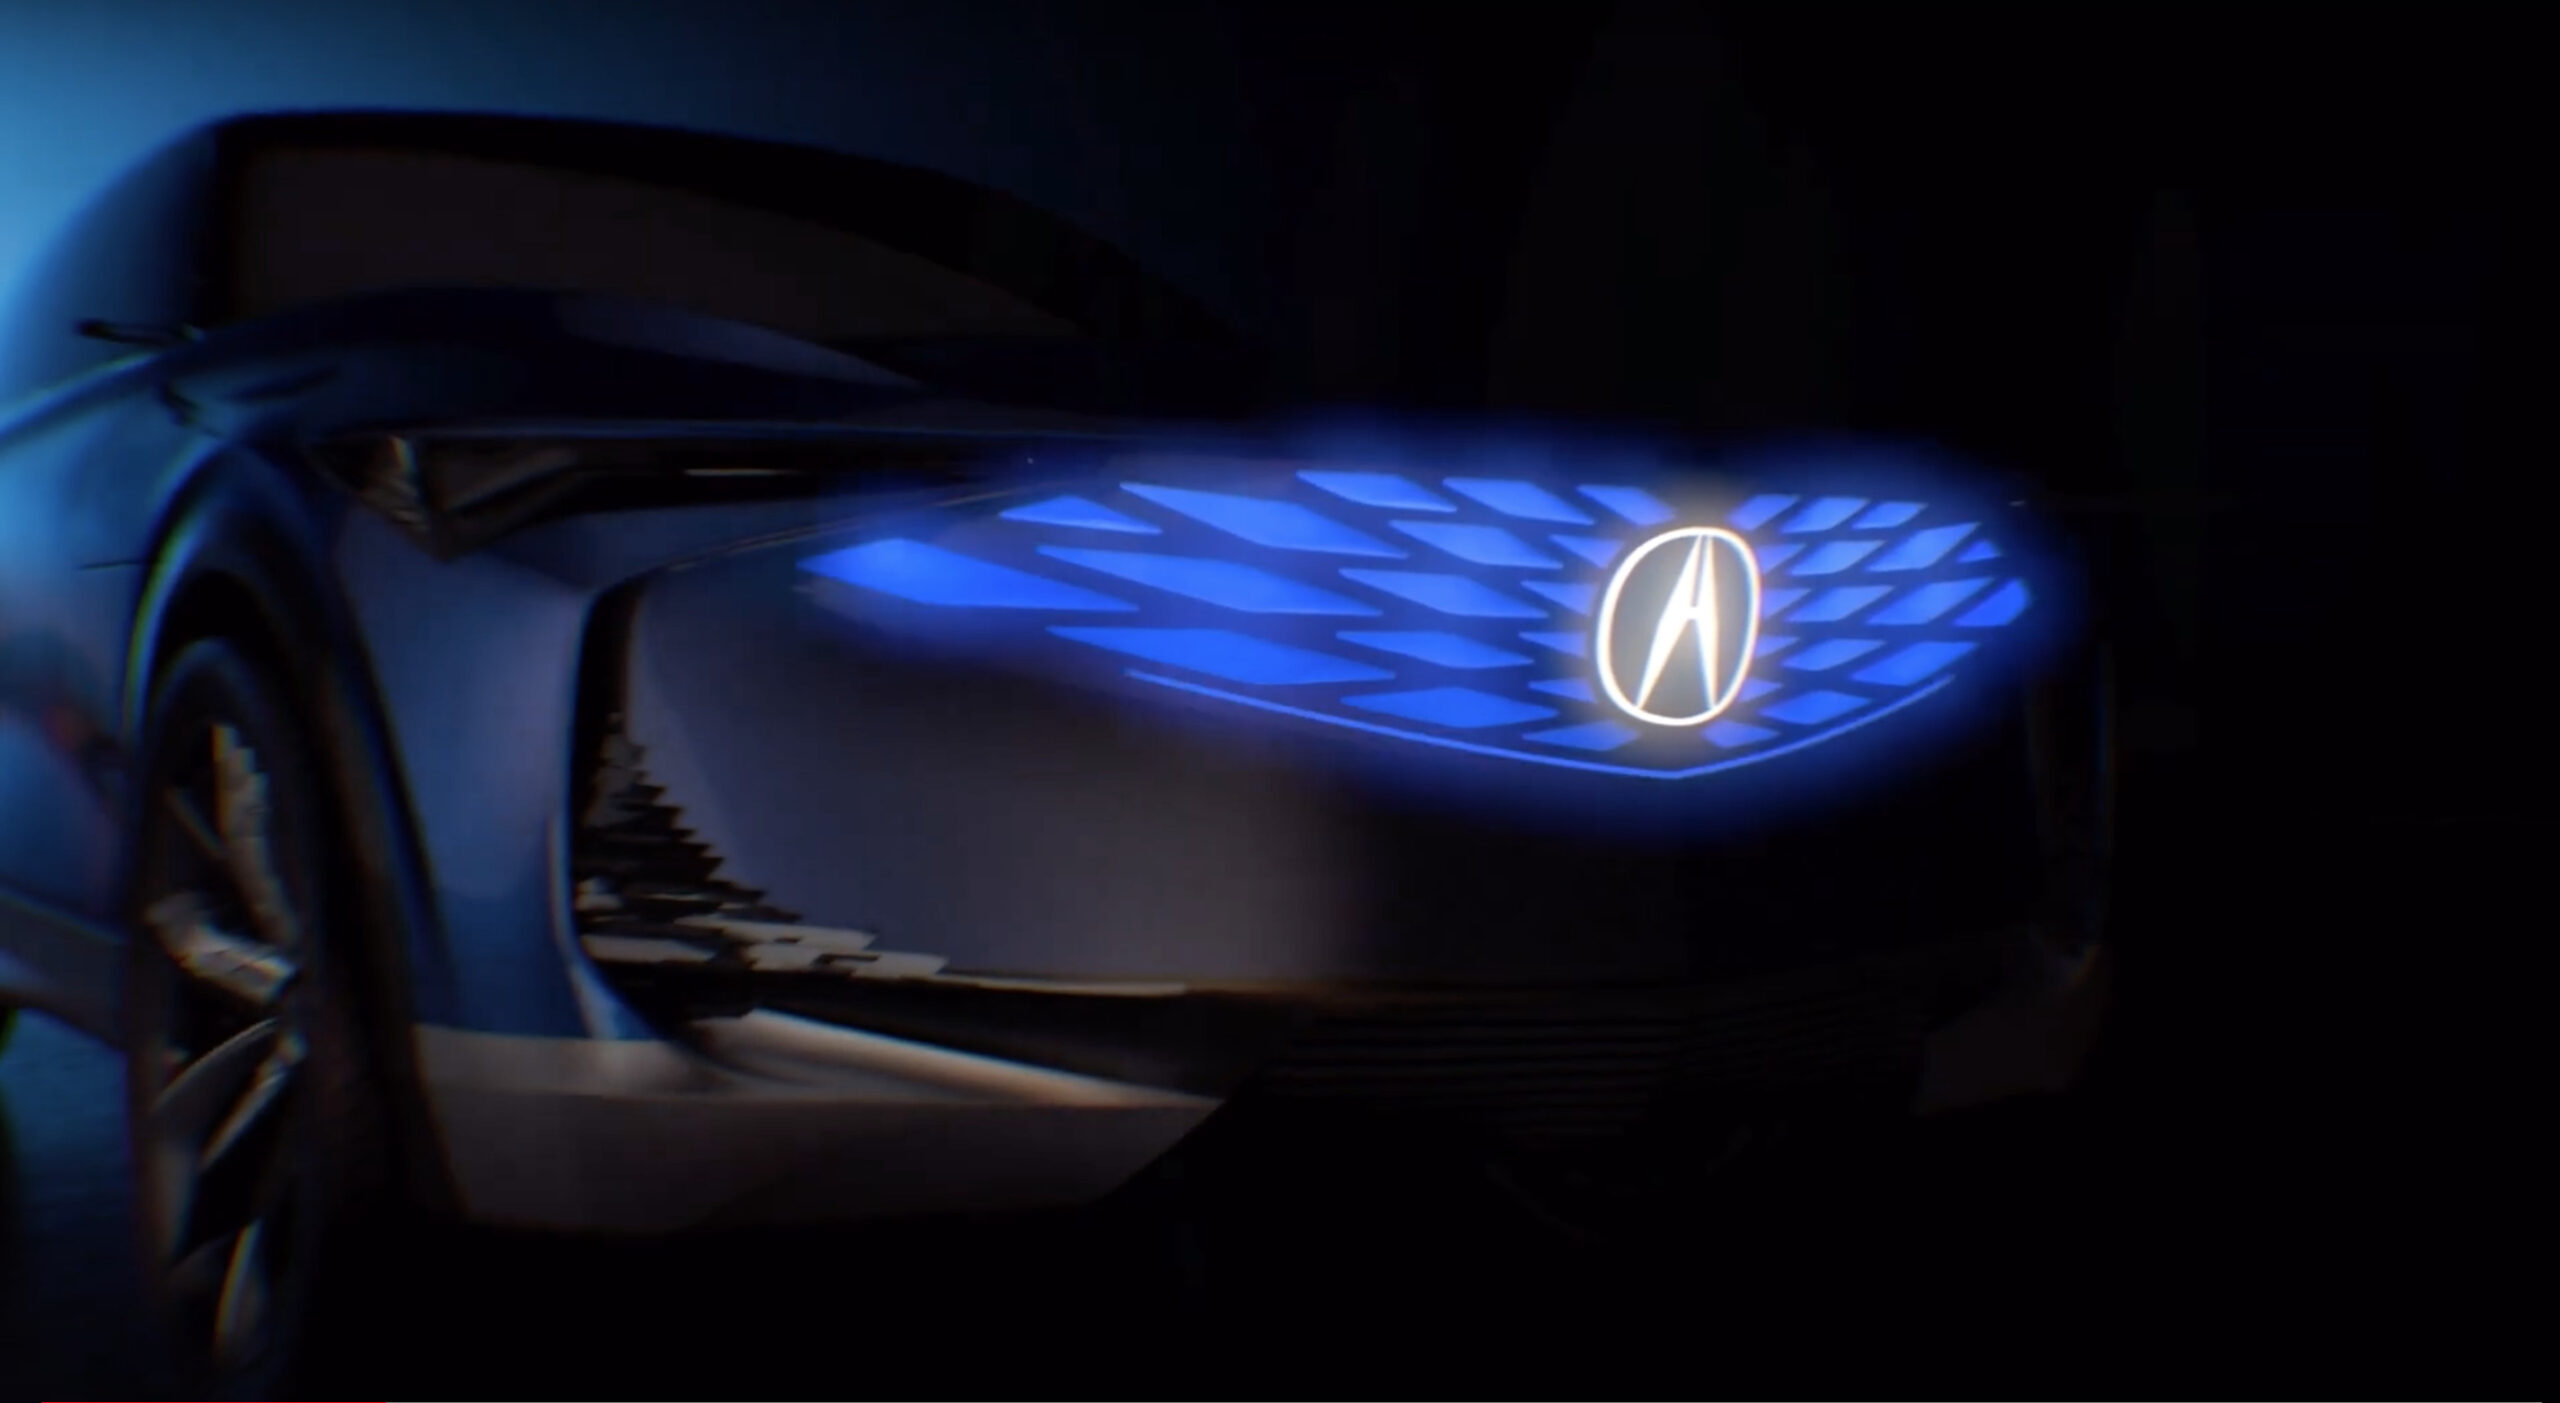 Acura Precision EV Concept teased ahead of Monterey Car Week scaled